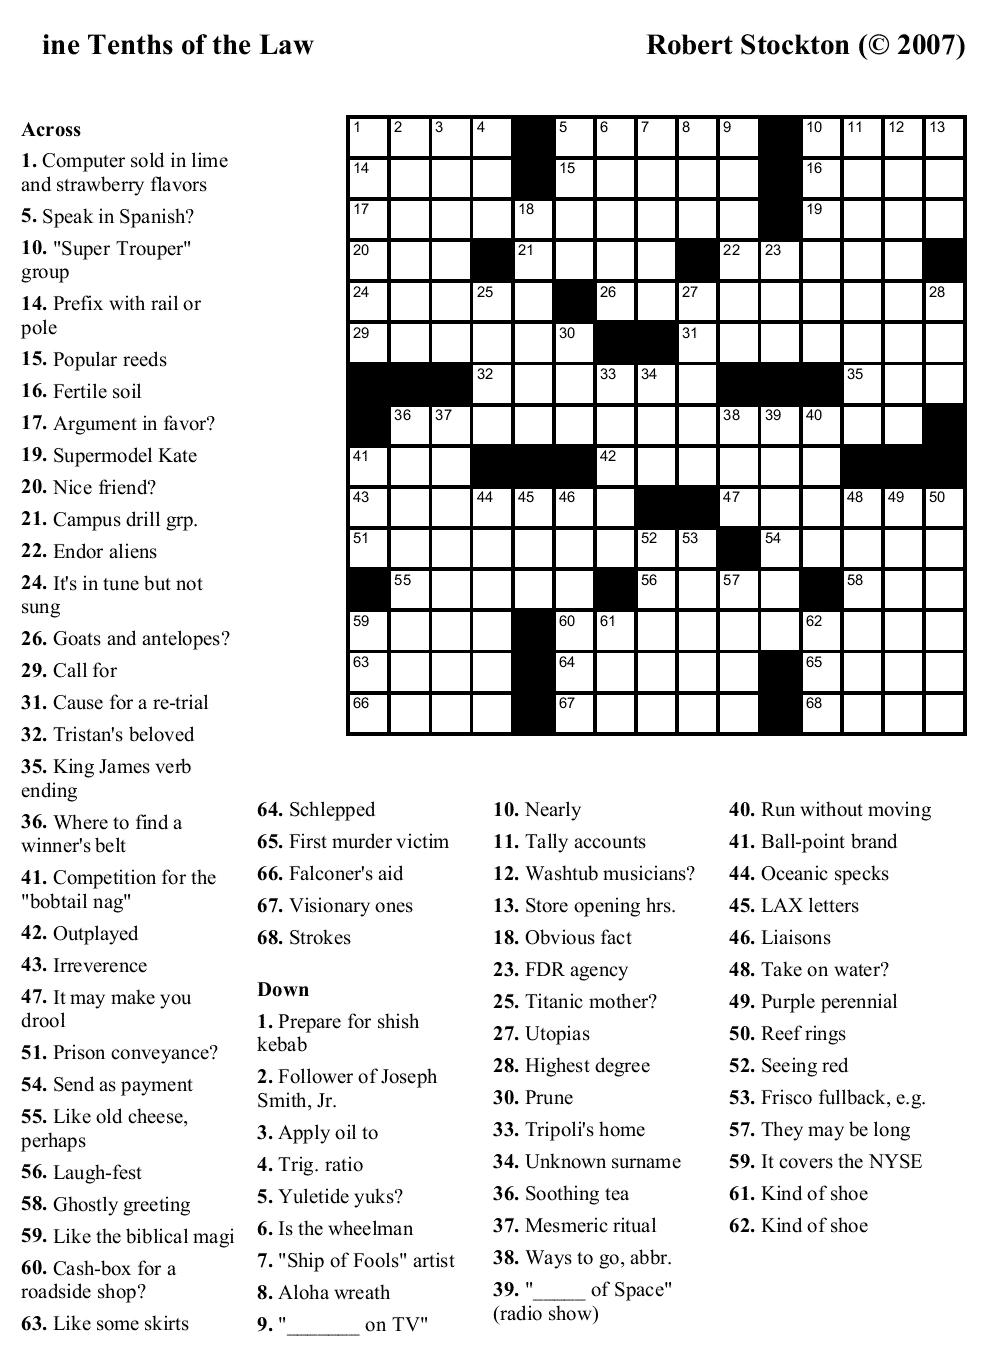 Crossword Puzzles Printable - Yahoo Image Search Results | Crossword - Printable Crossword Puzzles Usa Today